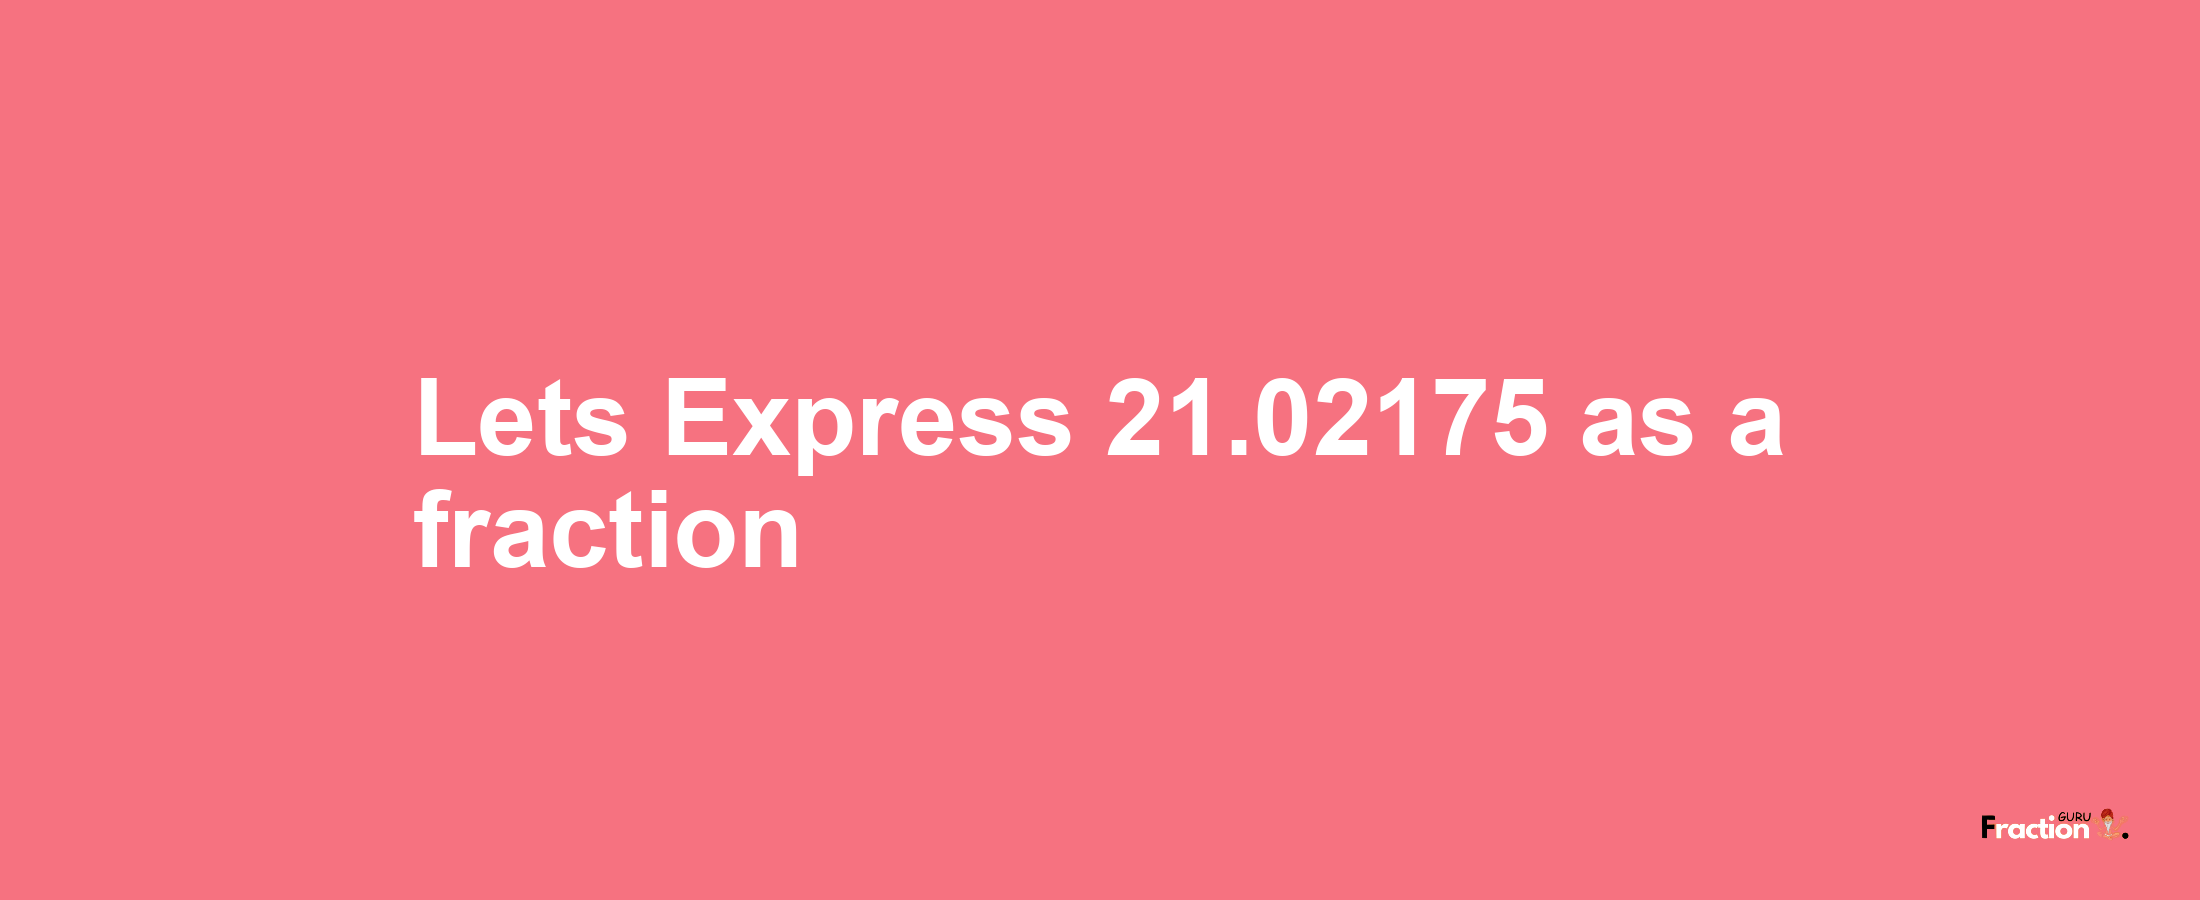 Lets Express 21.02175 as afraction